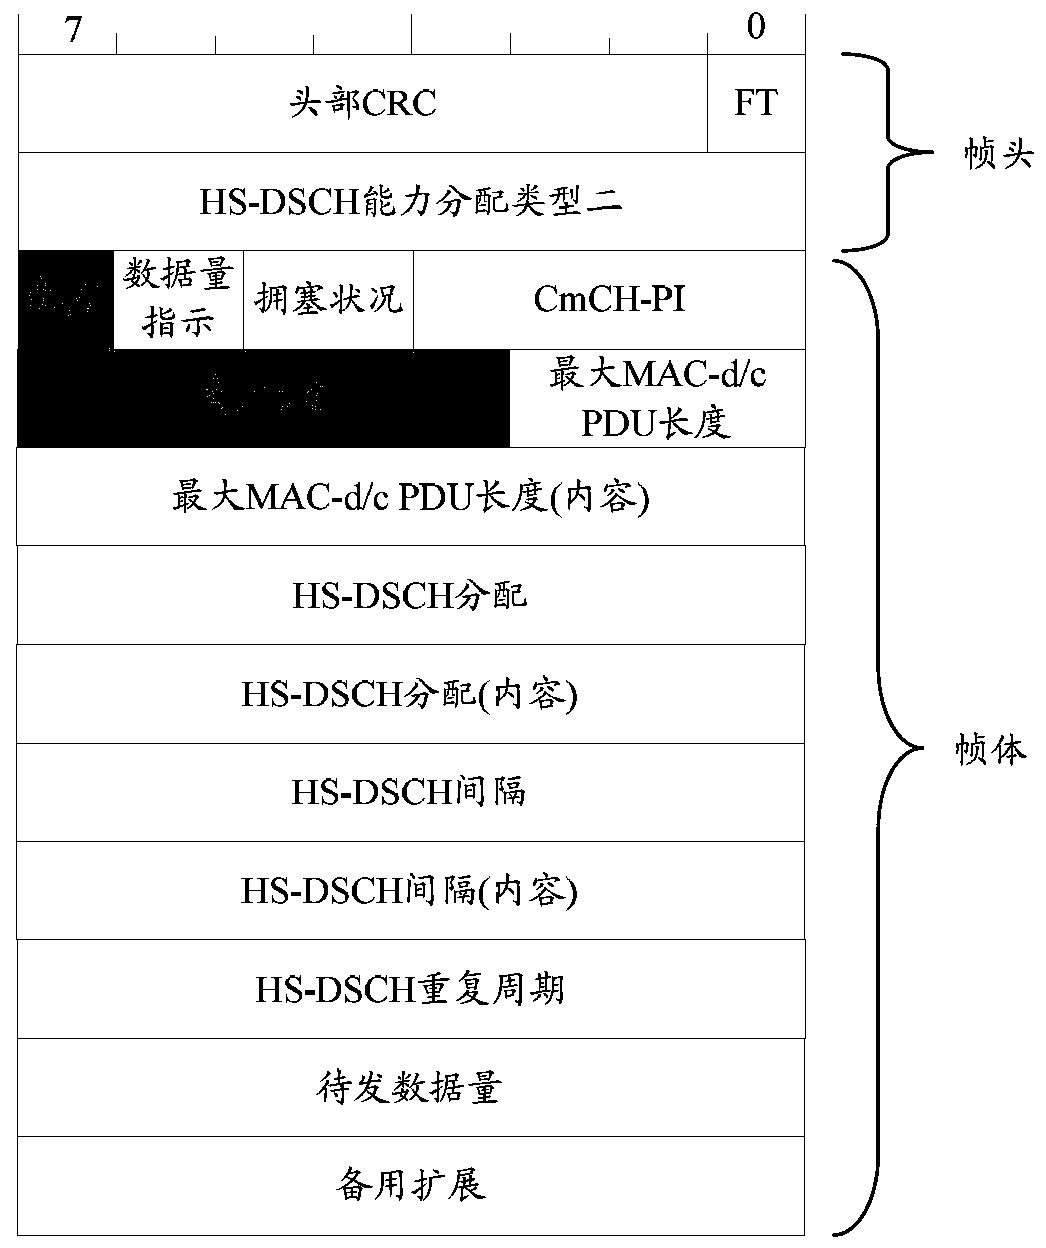 A method, system and device for optimizing high-speed downlink packet access to multiple streams